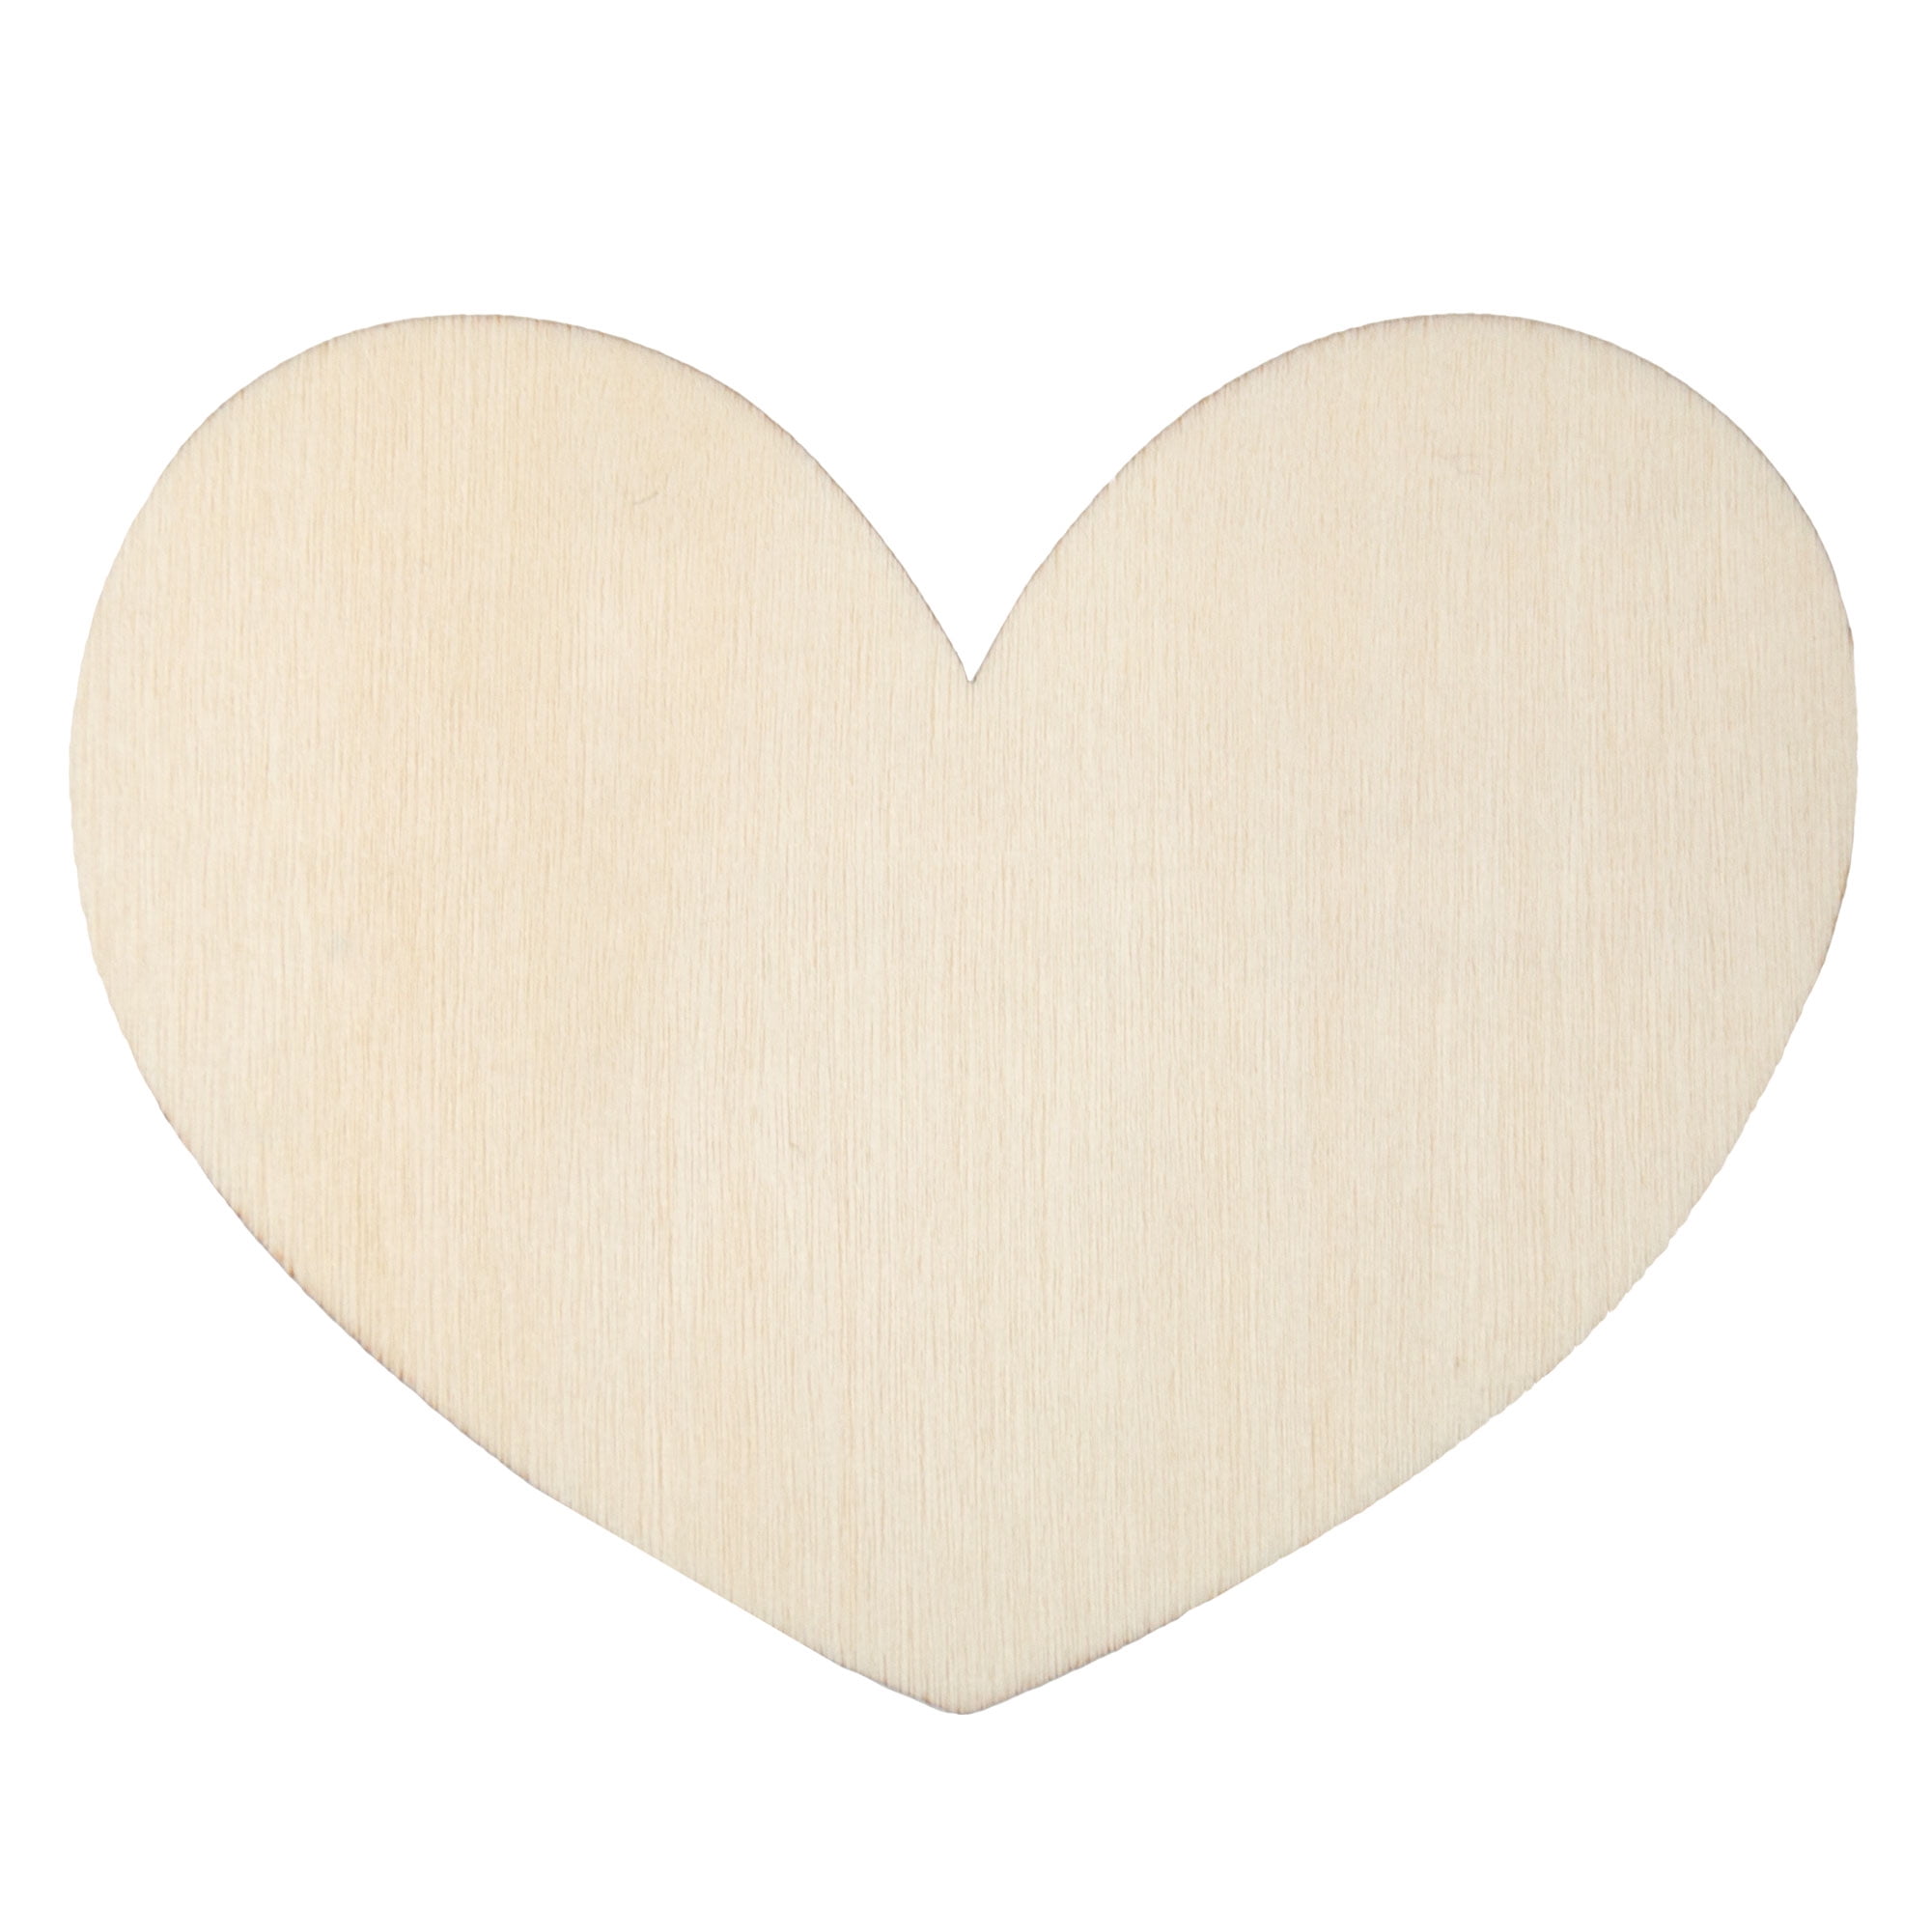 Hello Hobby Wood Heart Shape, Ready-to-Decorate Die-Cut Shape, 3.85 in. x 0.145 in. x 3 in.